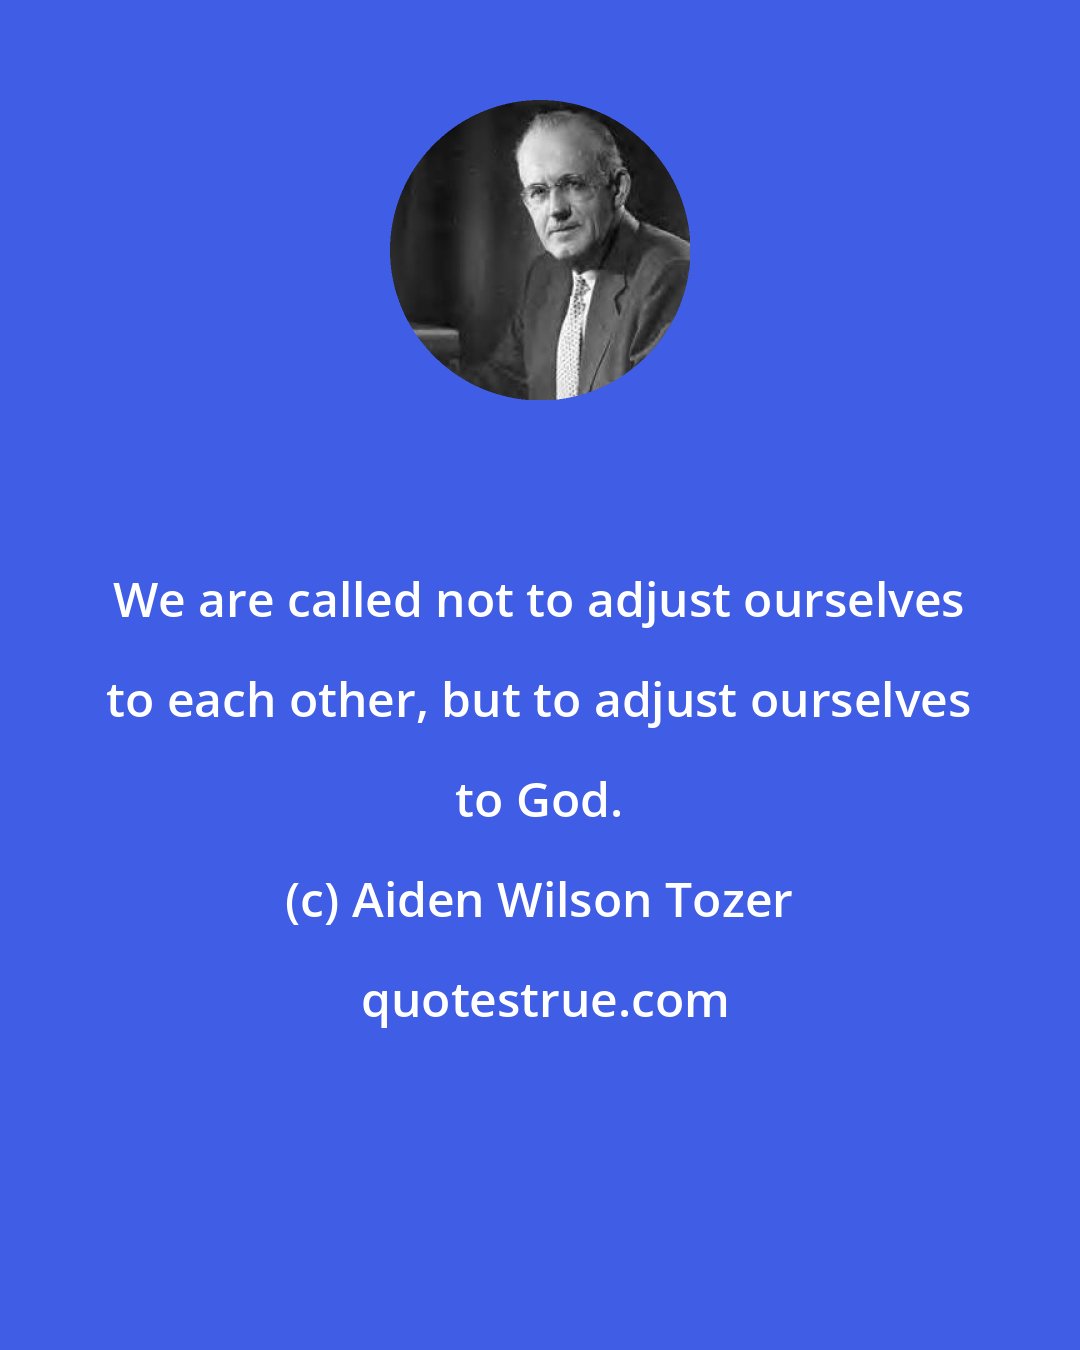 Aiden Wilson Tozer: We are called not to adjust ourselves to each other, but to adjust ourselves to God.